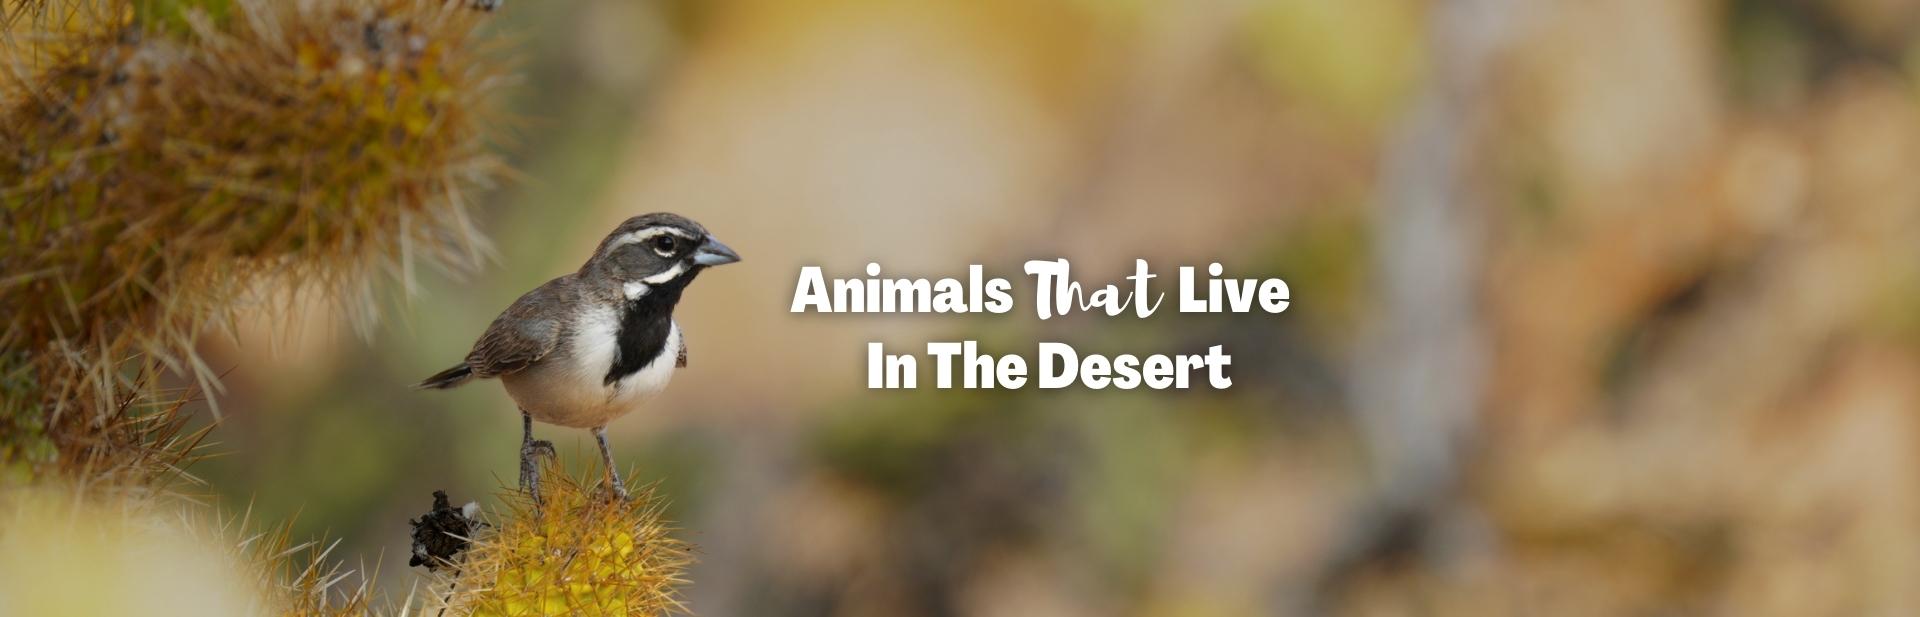 Meet 22 Animals That Live in the Desert: How Do They Adapt?